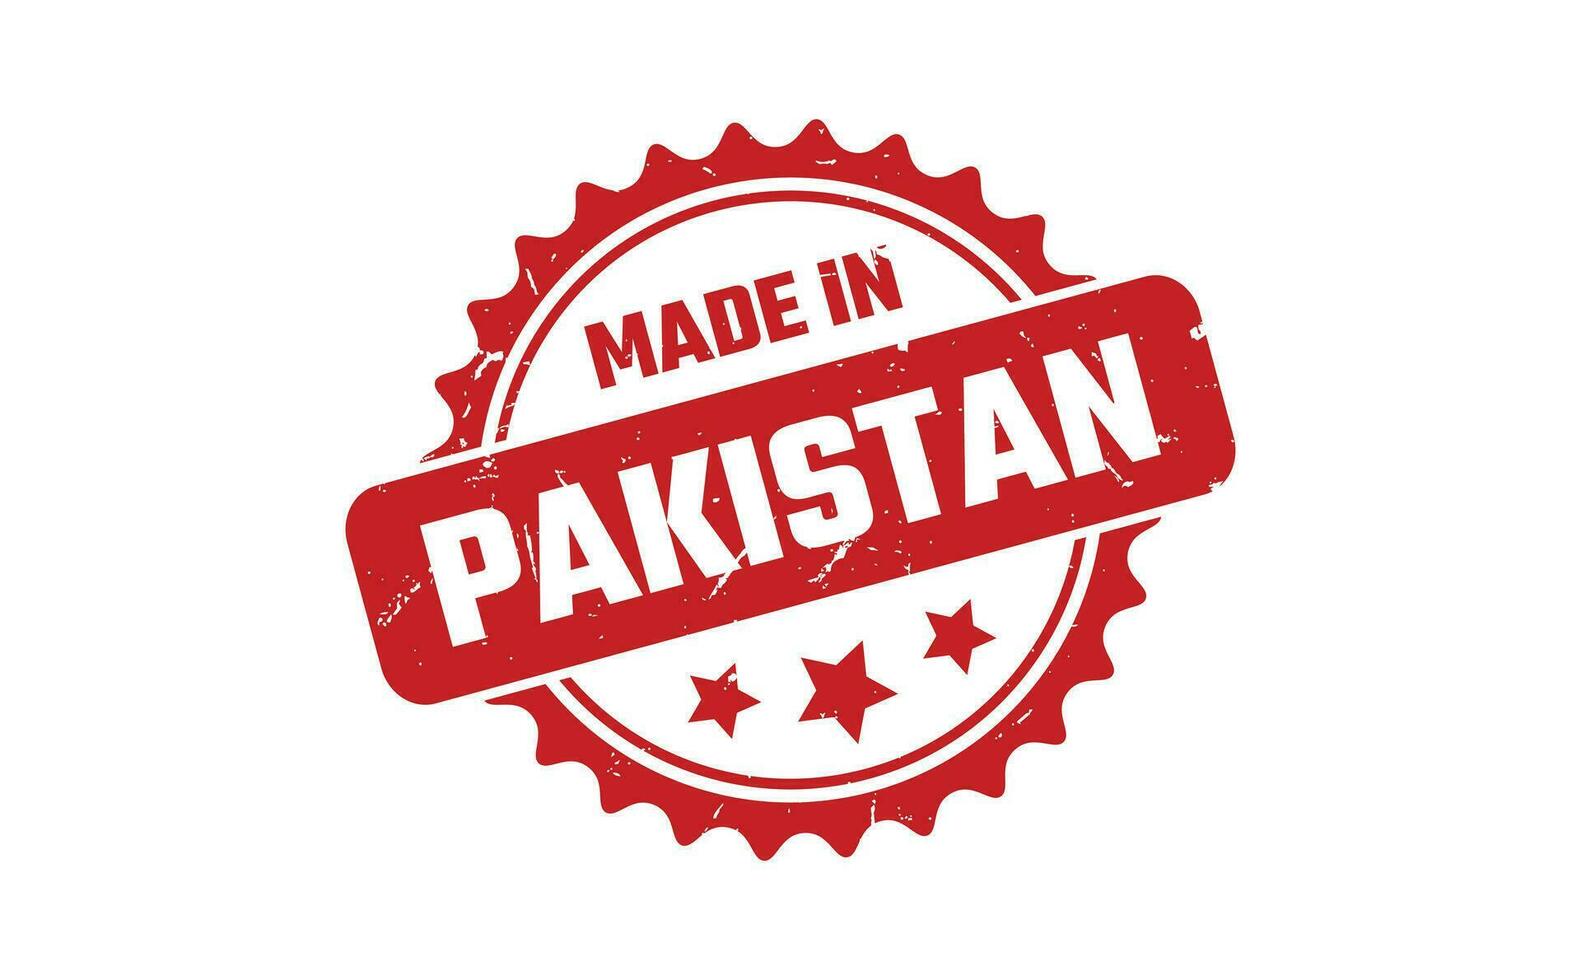 Made In Pakistan Rubber Stamp vector